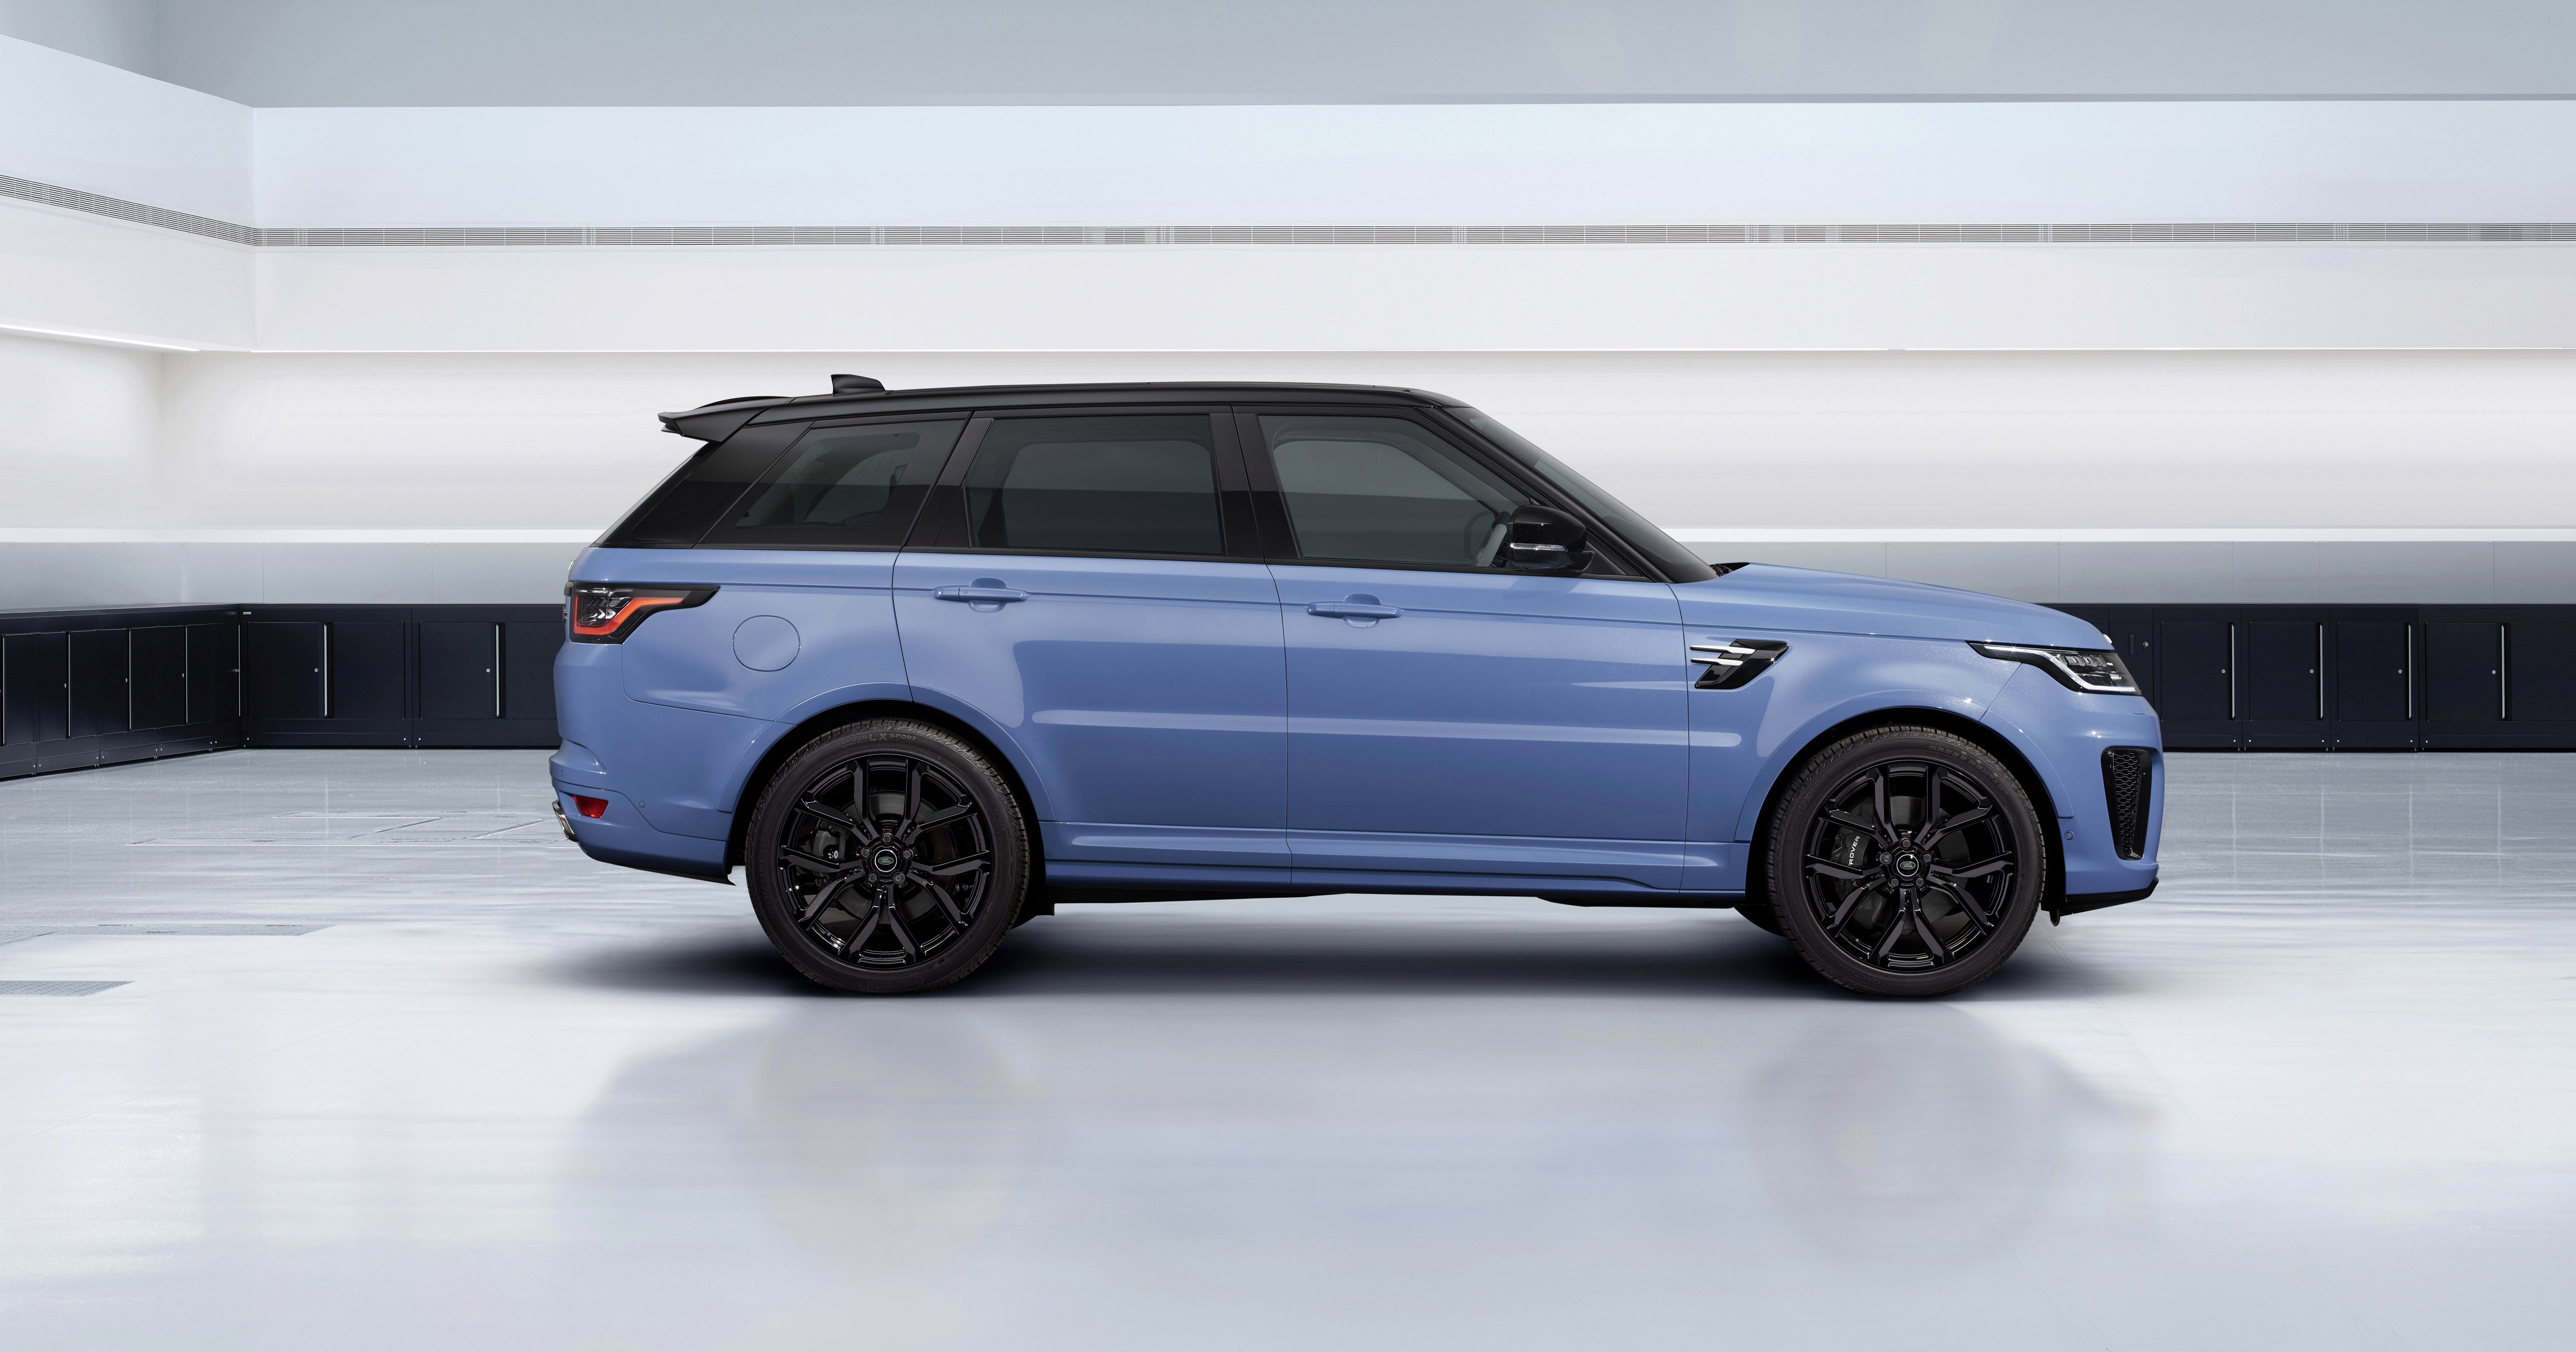 2022 Rover Rover Sport Supercharged Pricing, Specs